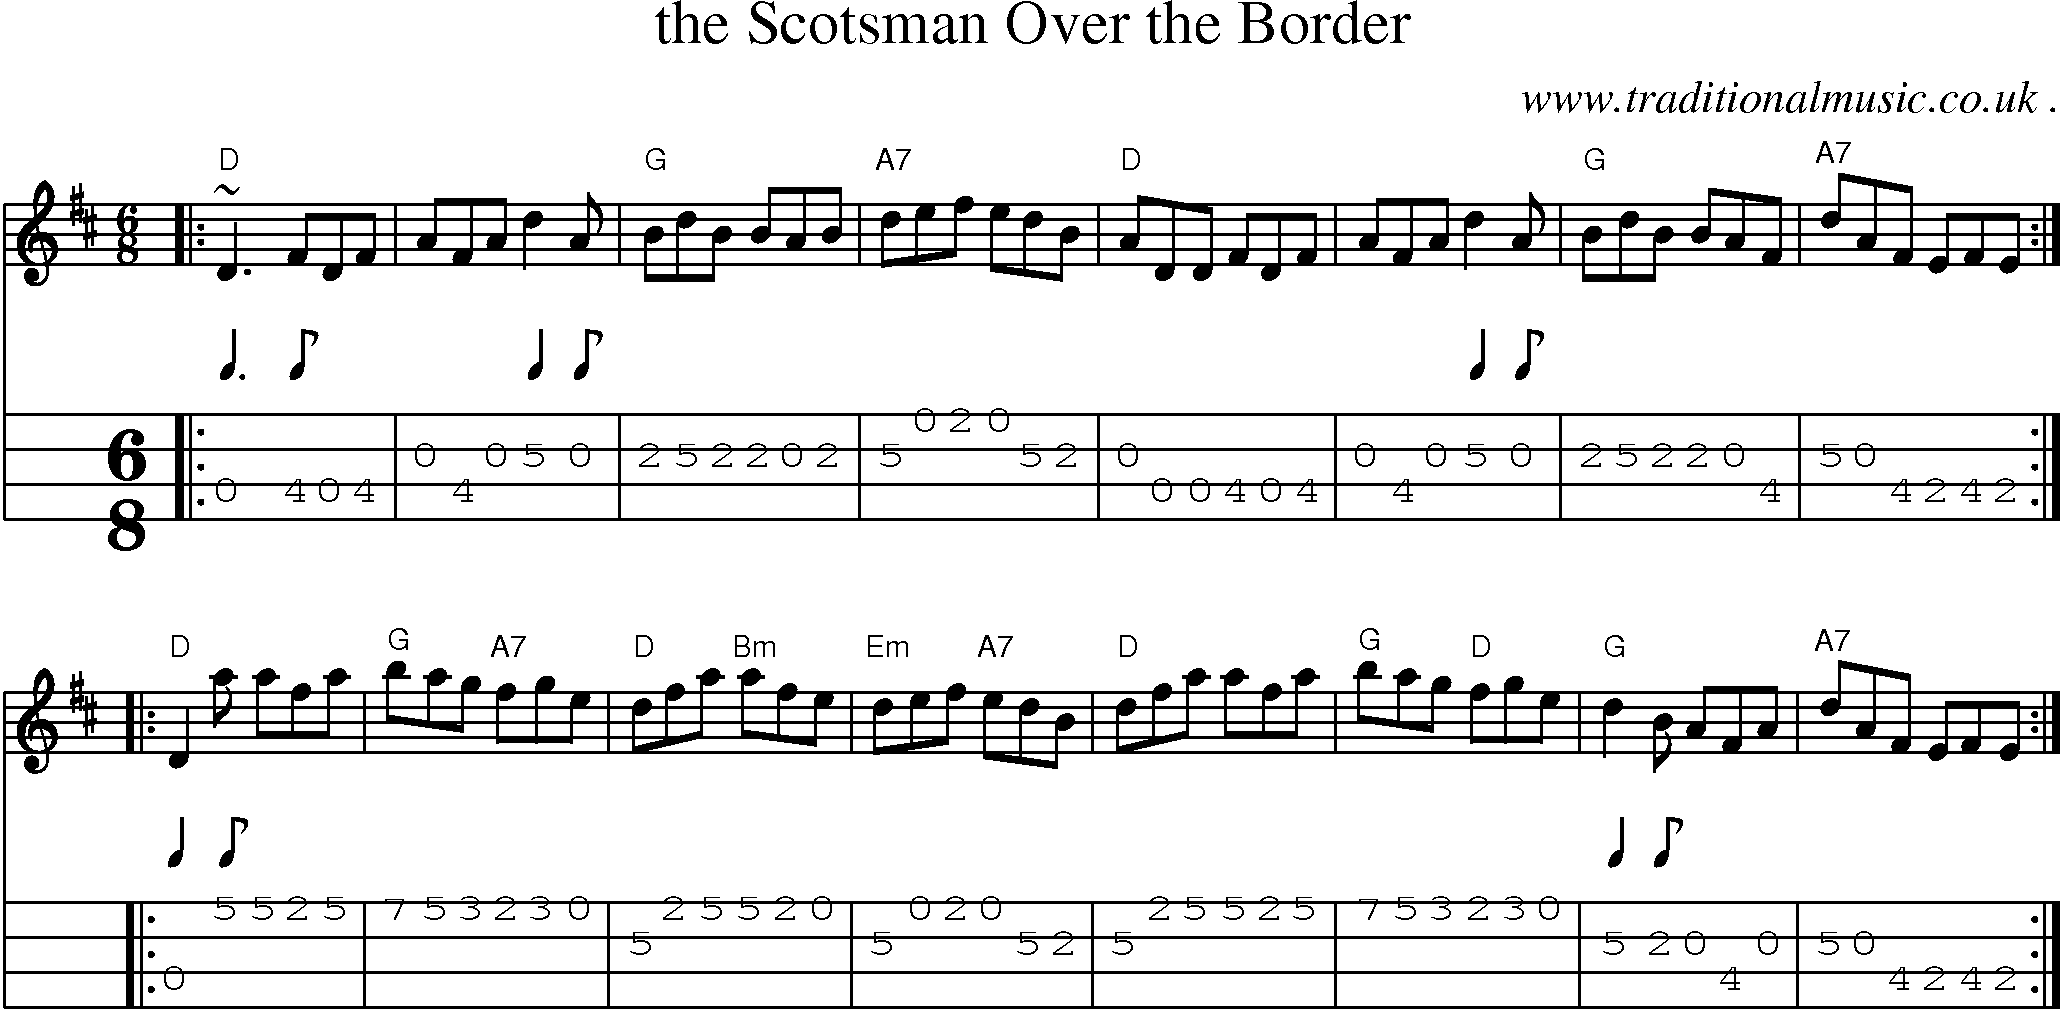 Sheet-music  score, Chords and Mandolin Tabs for The Scotsman Over The Border